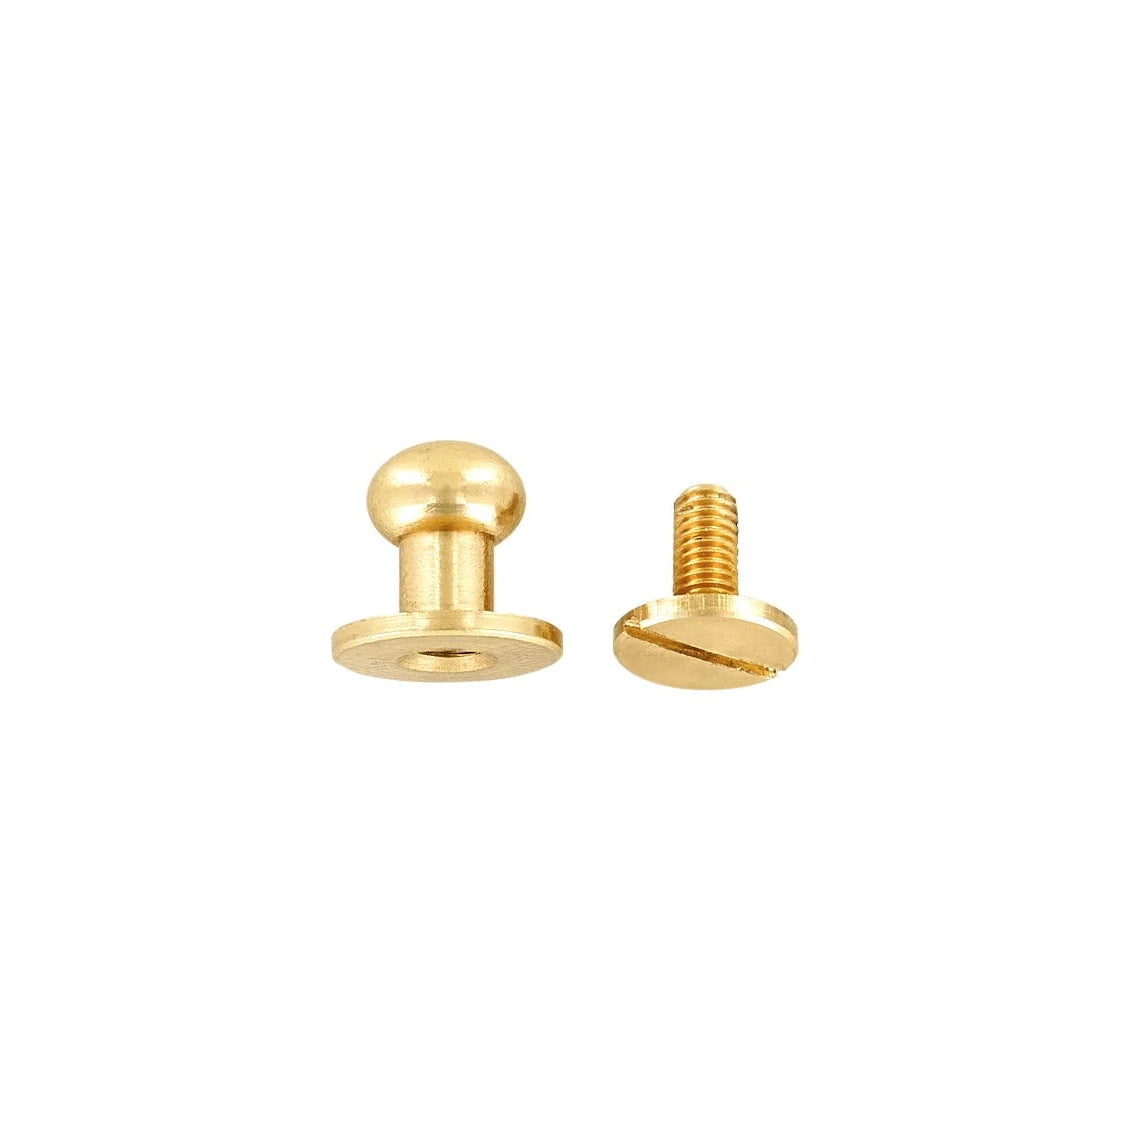 10mm, Brass, Flat Top Collar Button Stud with Screw, Solid Brass